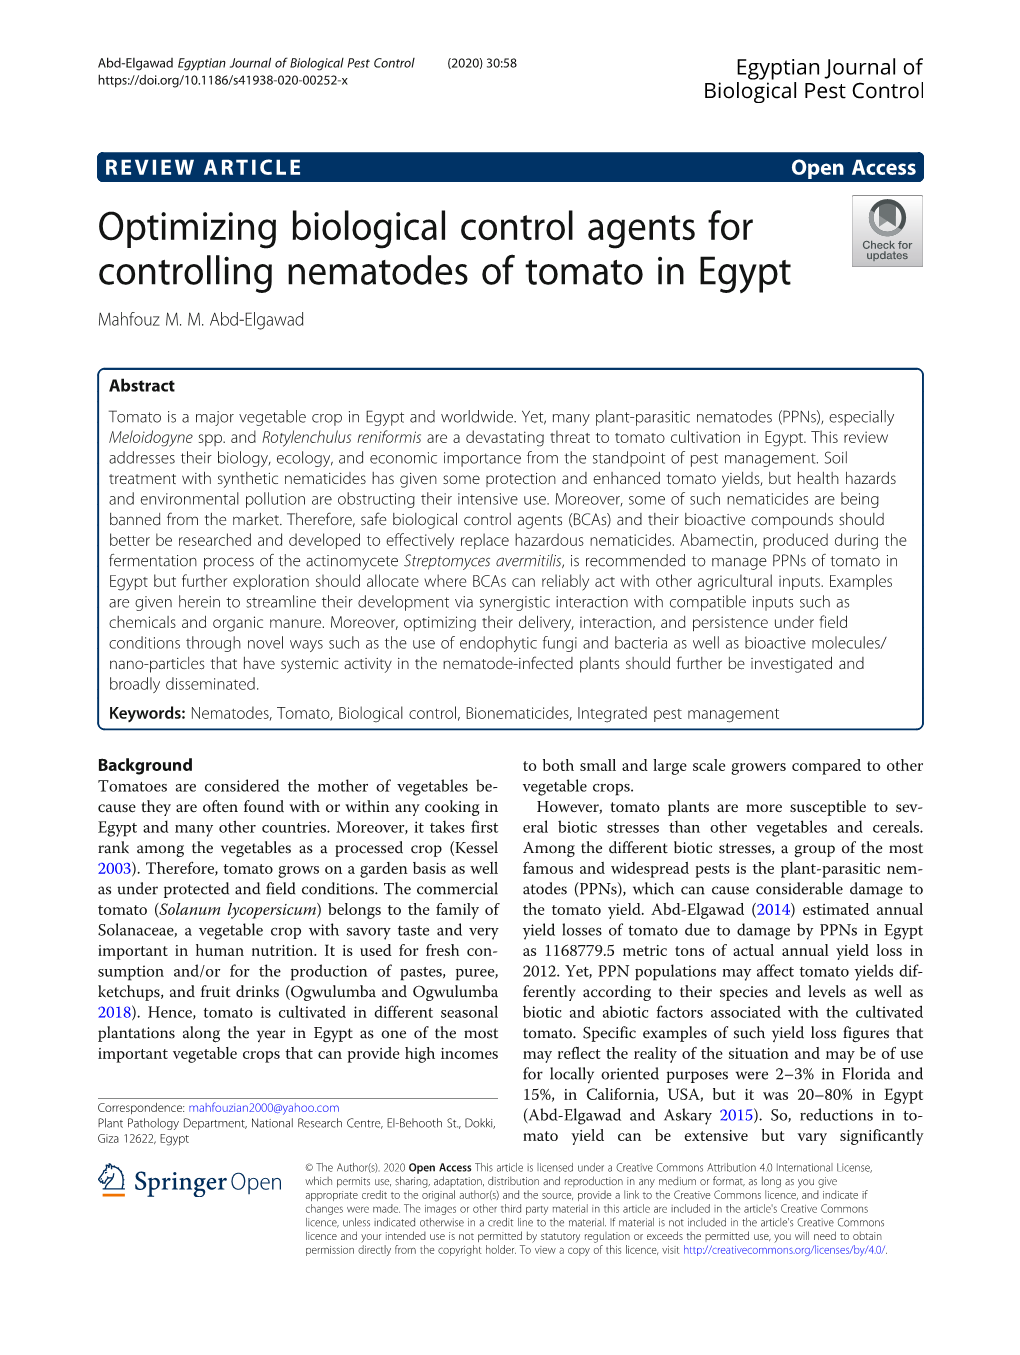 Optimizing Biological Control Agents for Controlling Nematodes of Tomato in Egypt Mahfouz M